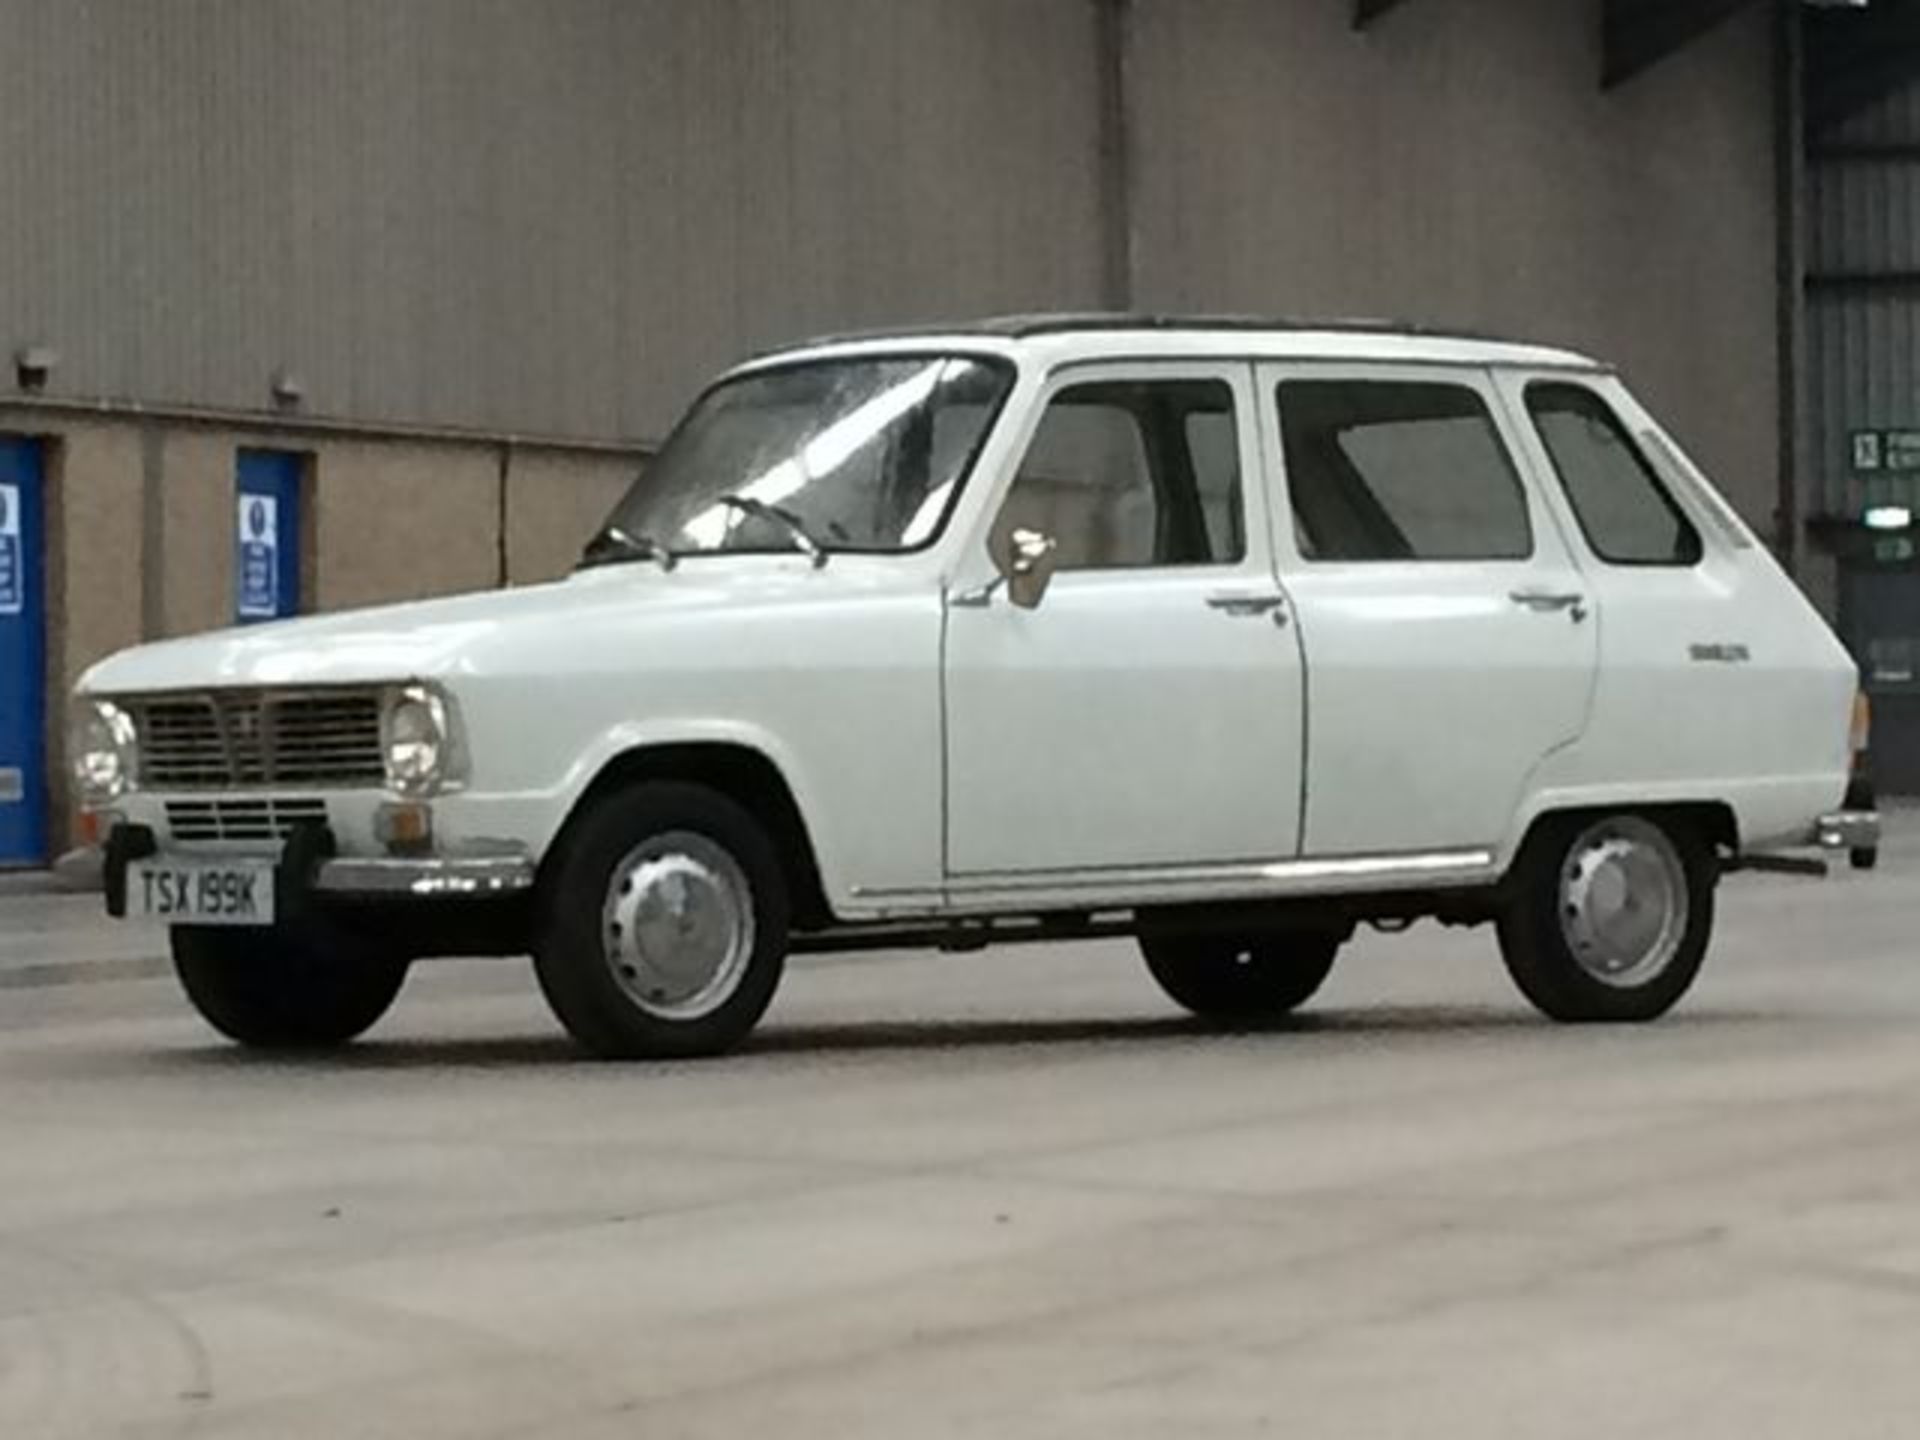 RENAULT 6 TL - 1108cc - Image 7 of 17